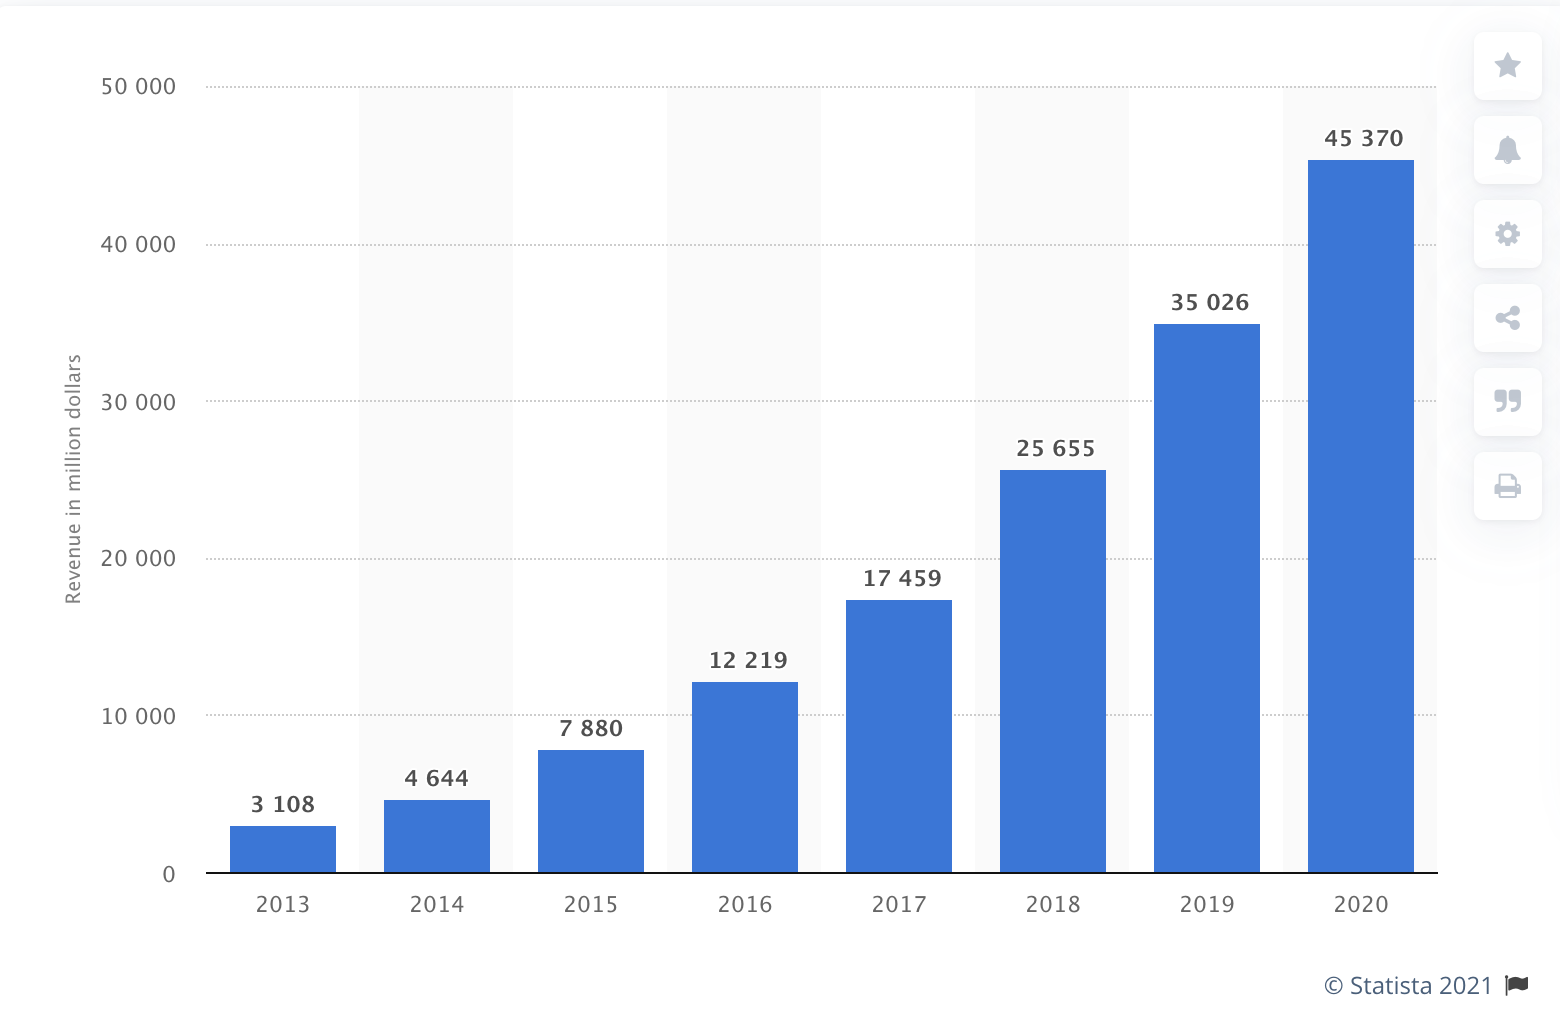 Statista revenue growth from 2013 to 2020